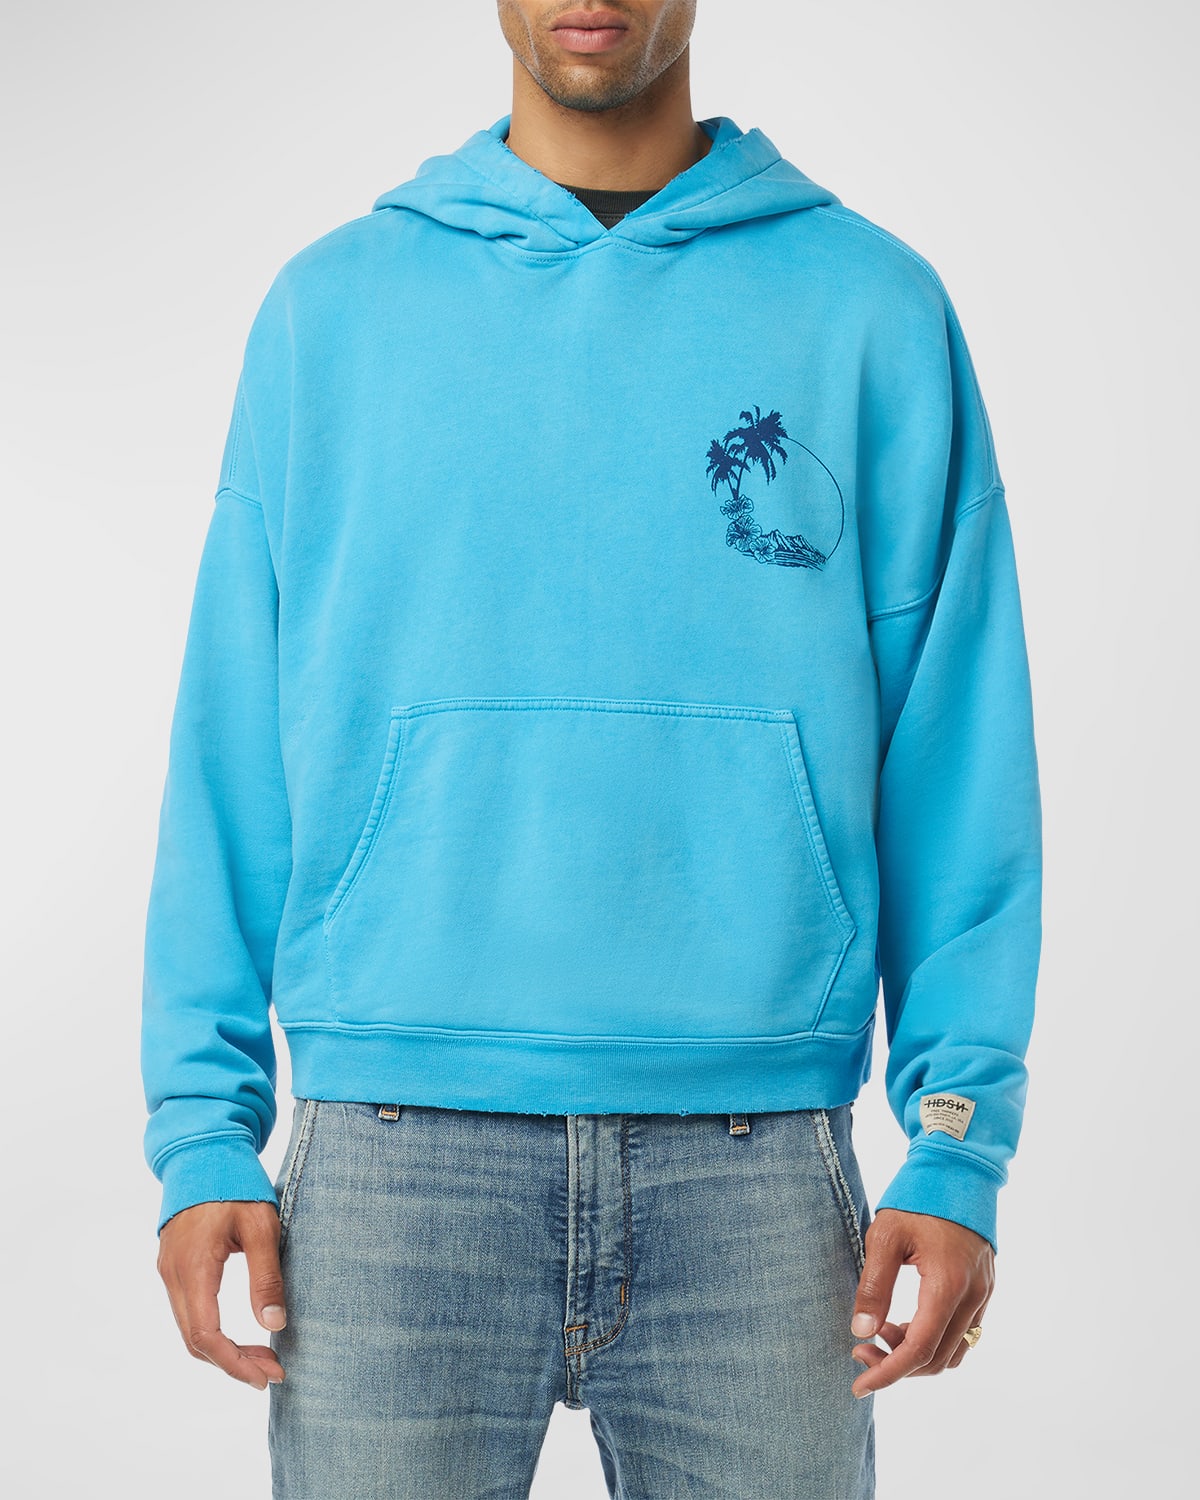 Men's Cropped Palm Graphic Hoodie